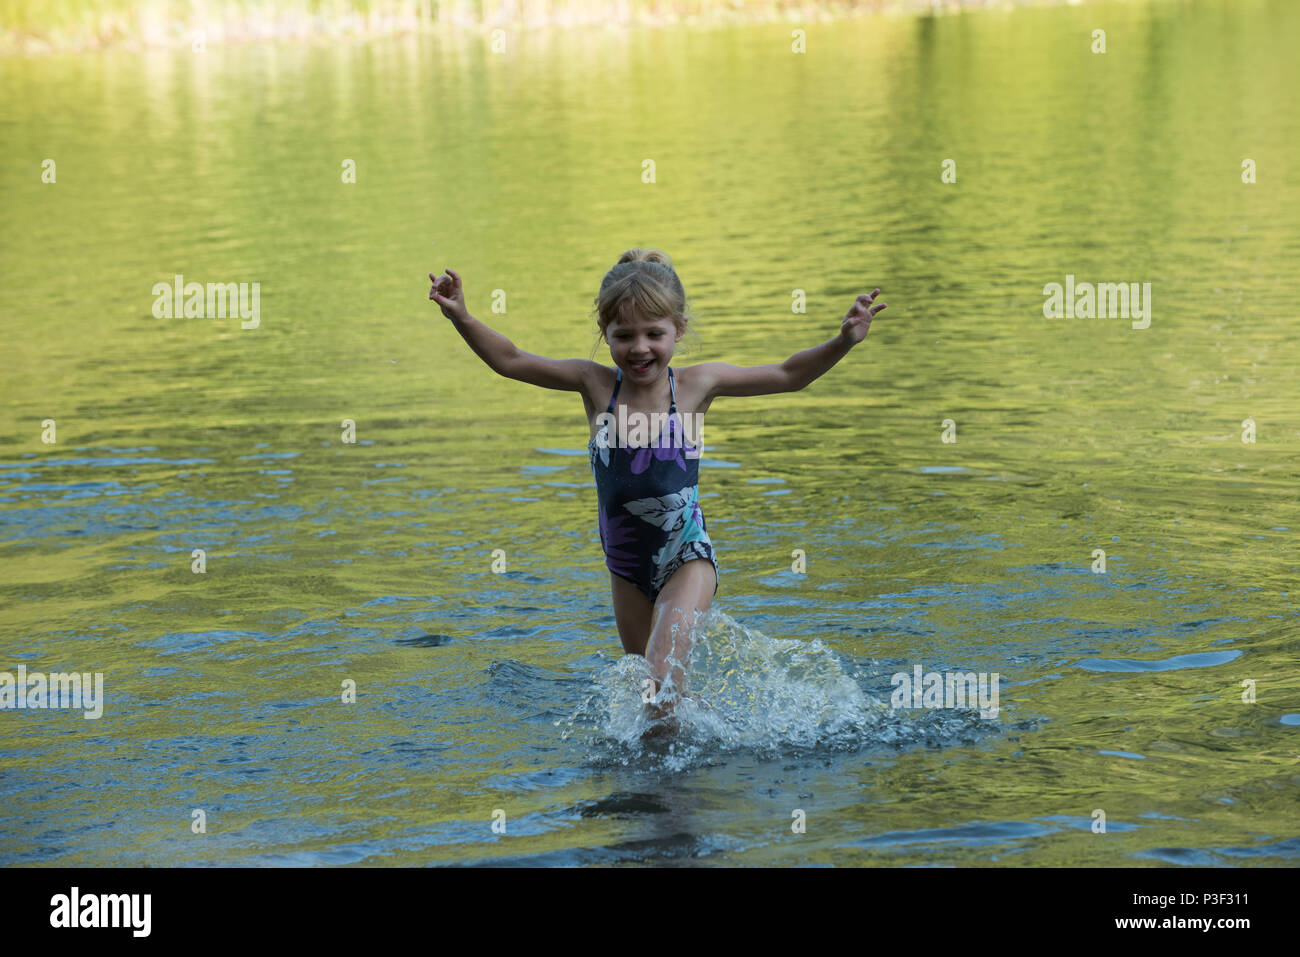 Girl playing in river Stock Photo